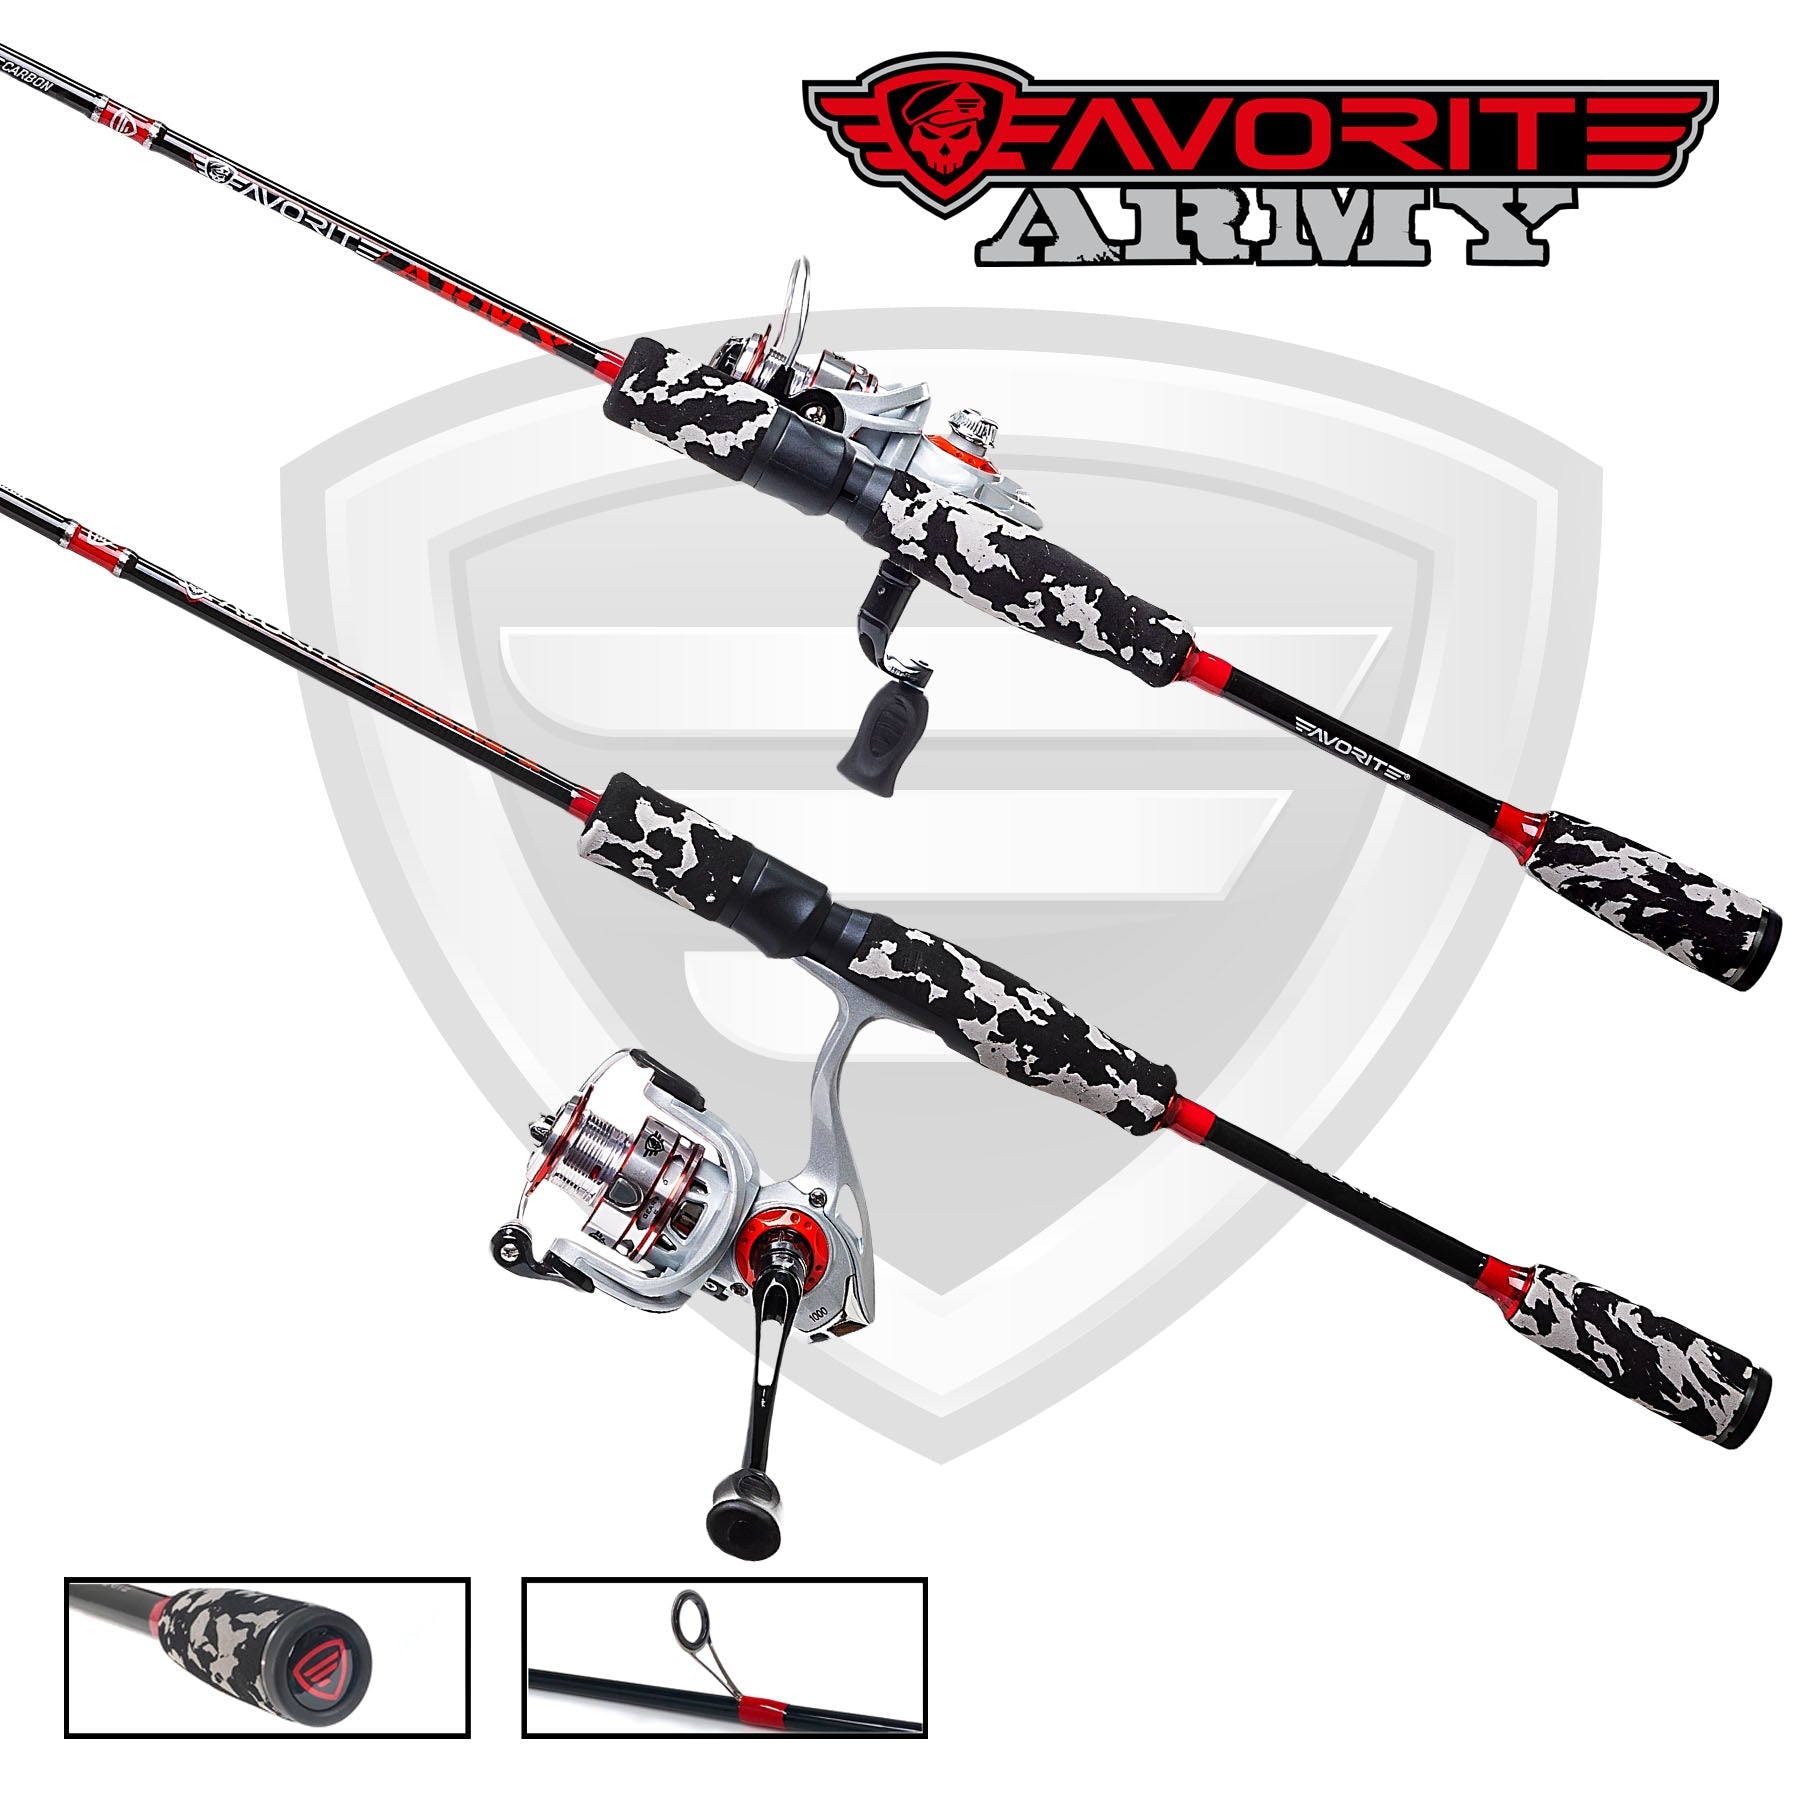 Crazy Outside Castcarbon Fast Action Spinning & Casting Rod 2.28m-2.4m,  40lb, Multi-environment